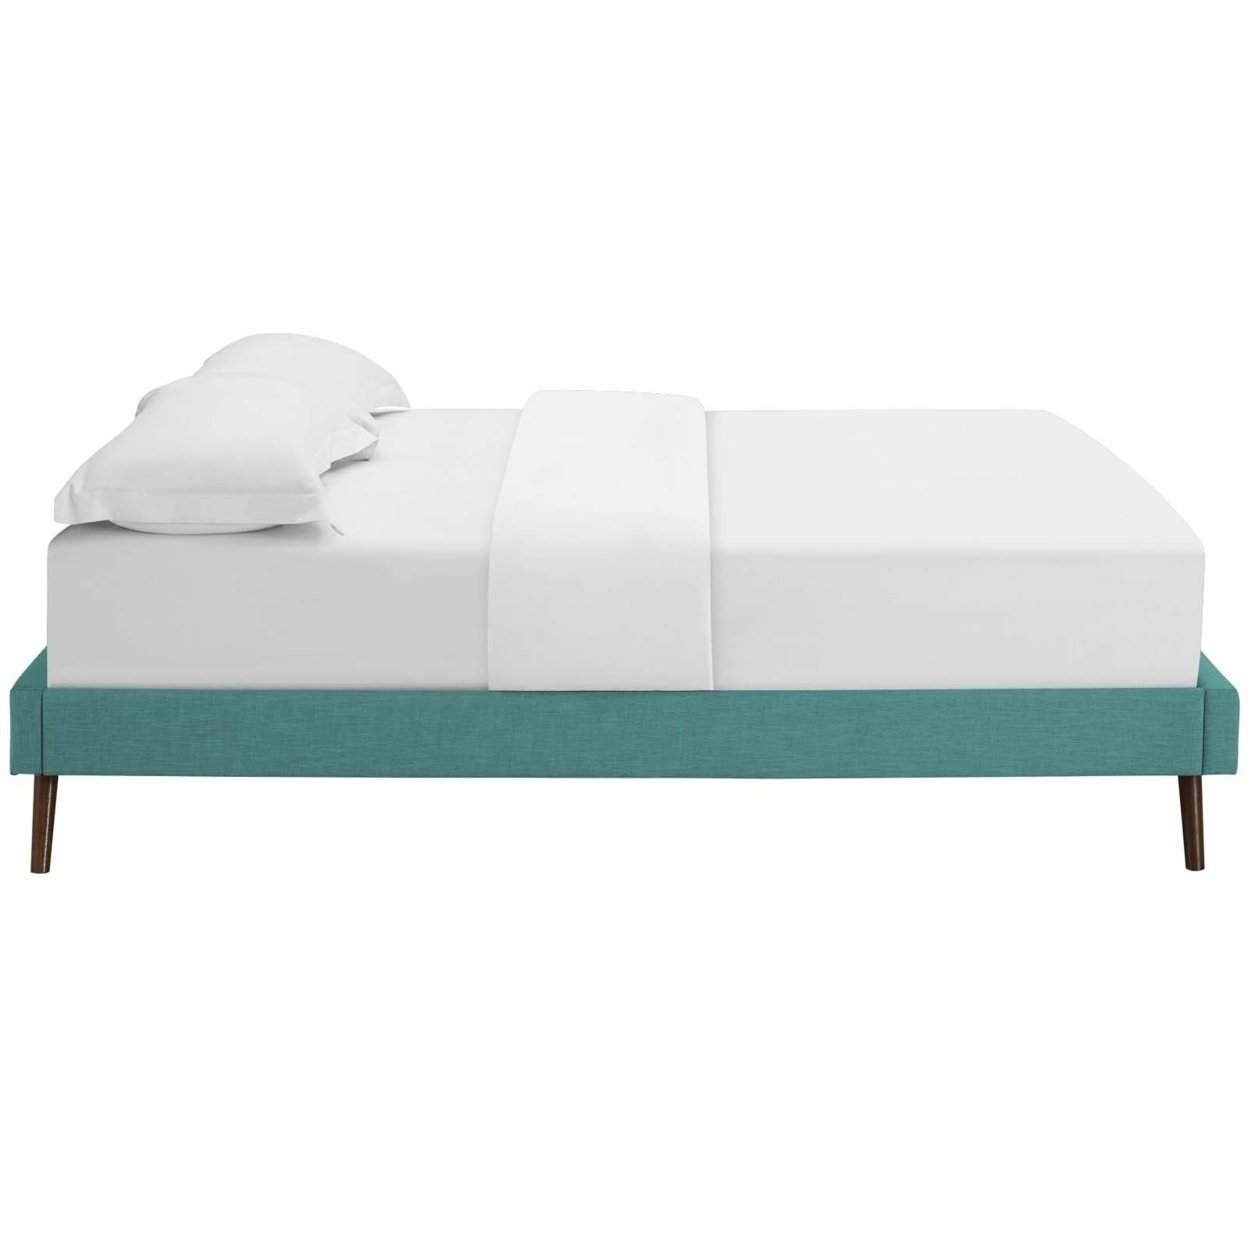 Loryn Queen Fabric Bed Frame With Round Splayed Legs, Teal